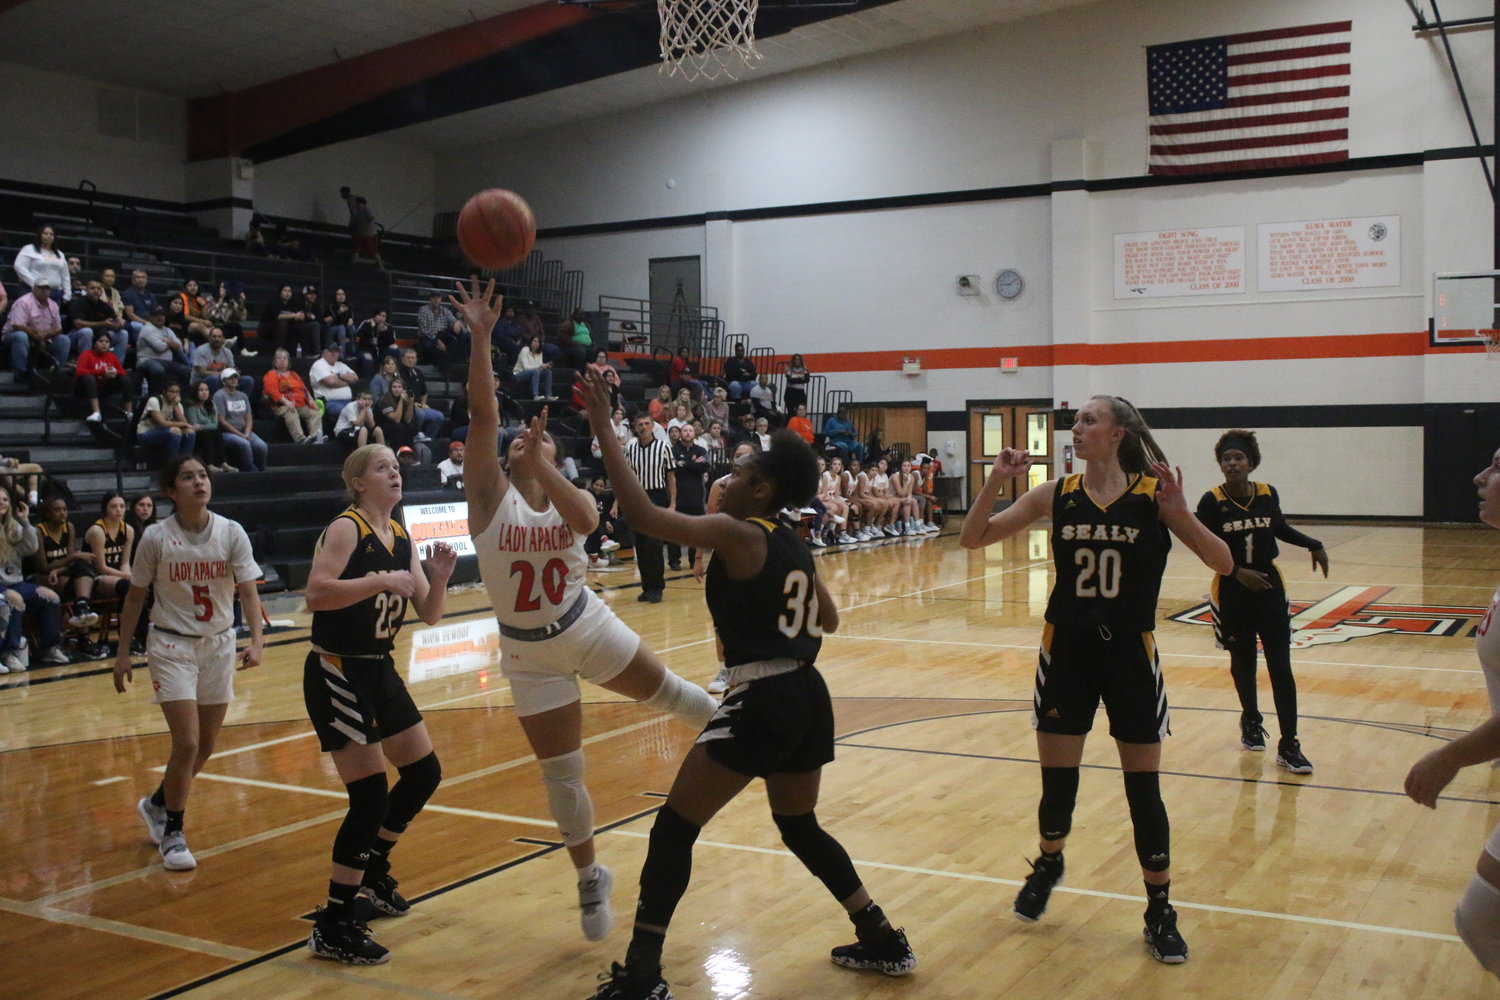 Delaini Seger-Gordon looks to score inside against the paint against the Lady Tigers while Kilee Schwausch looks on.